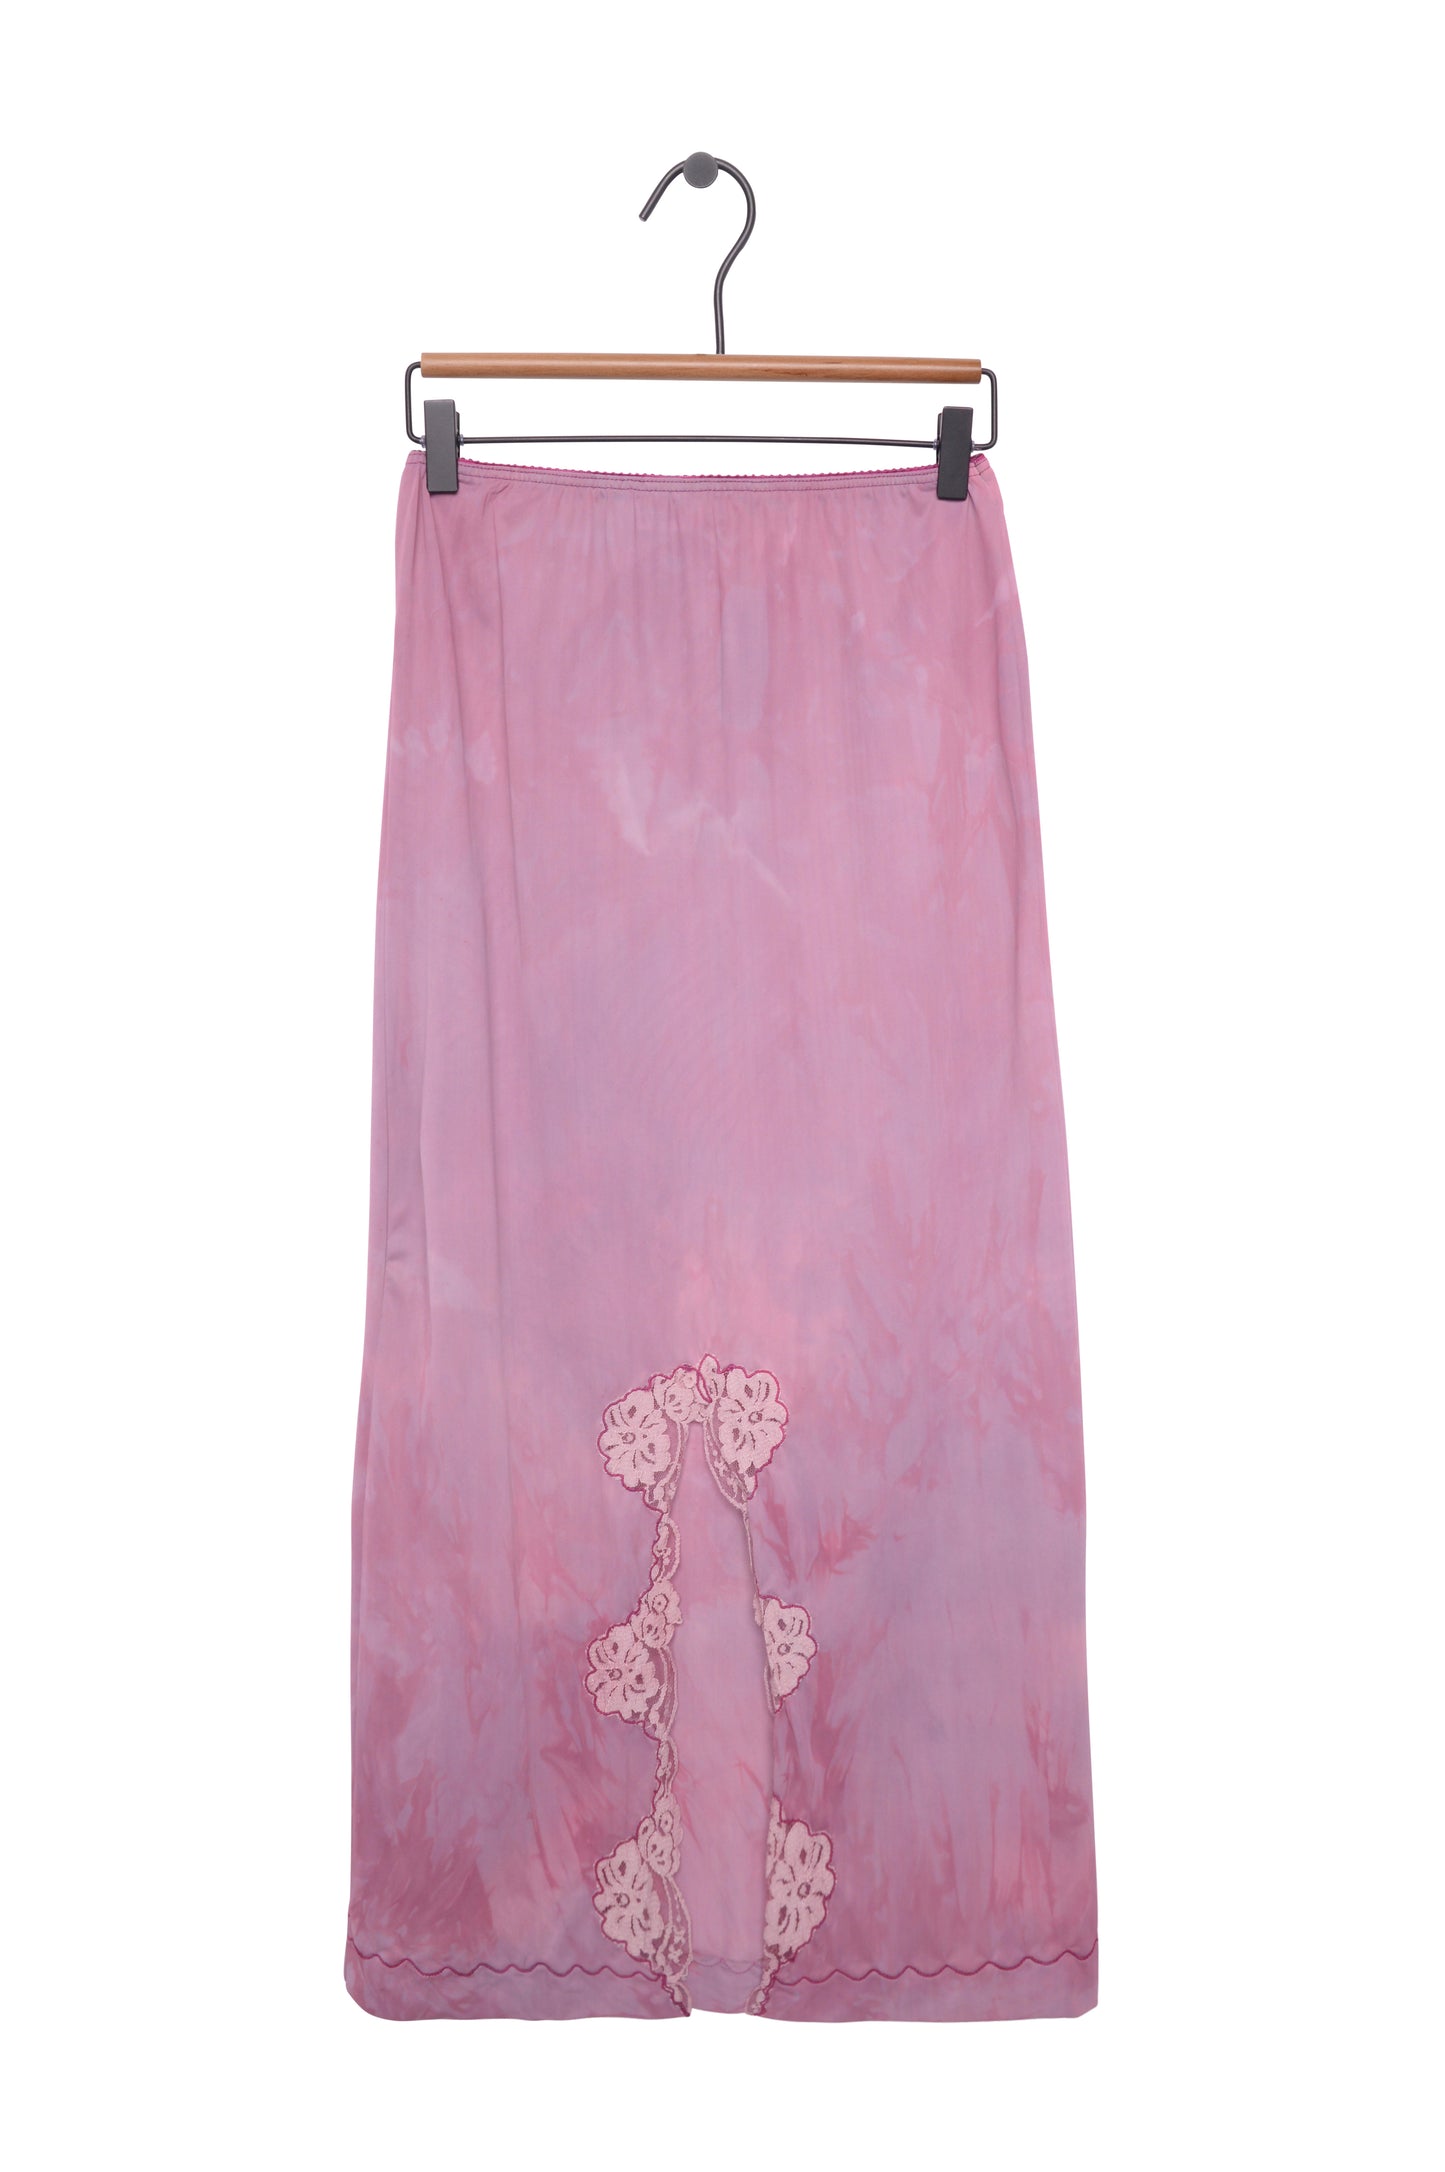 Hand Dyed Lace Slip Skirt USA